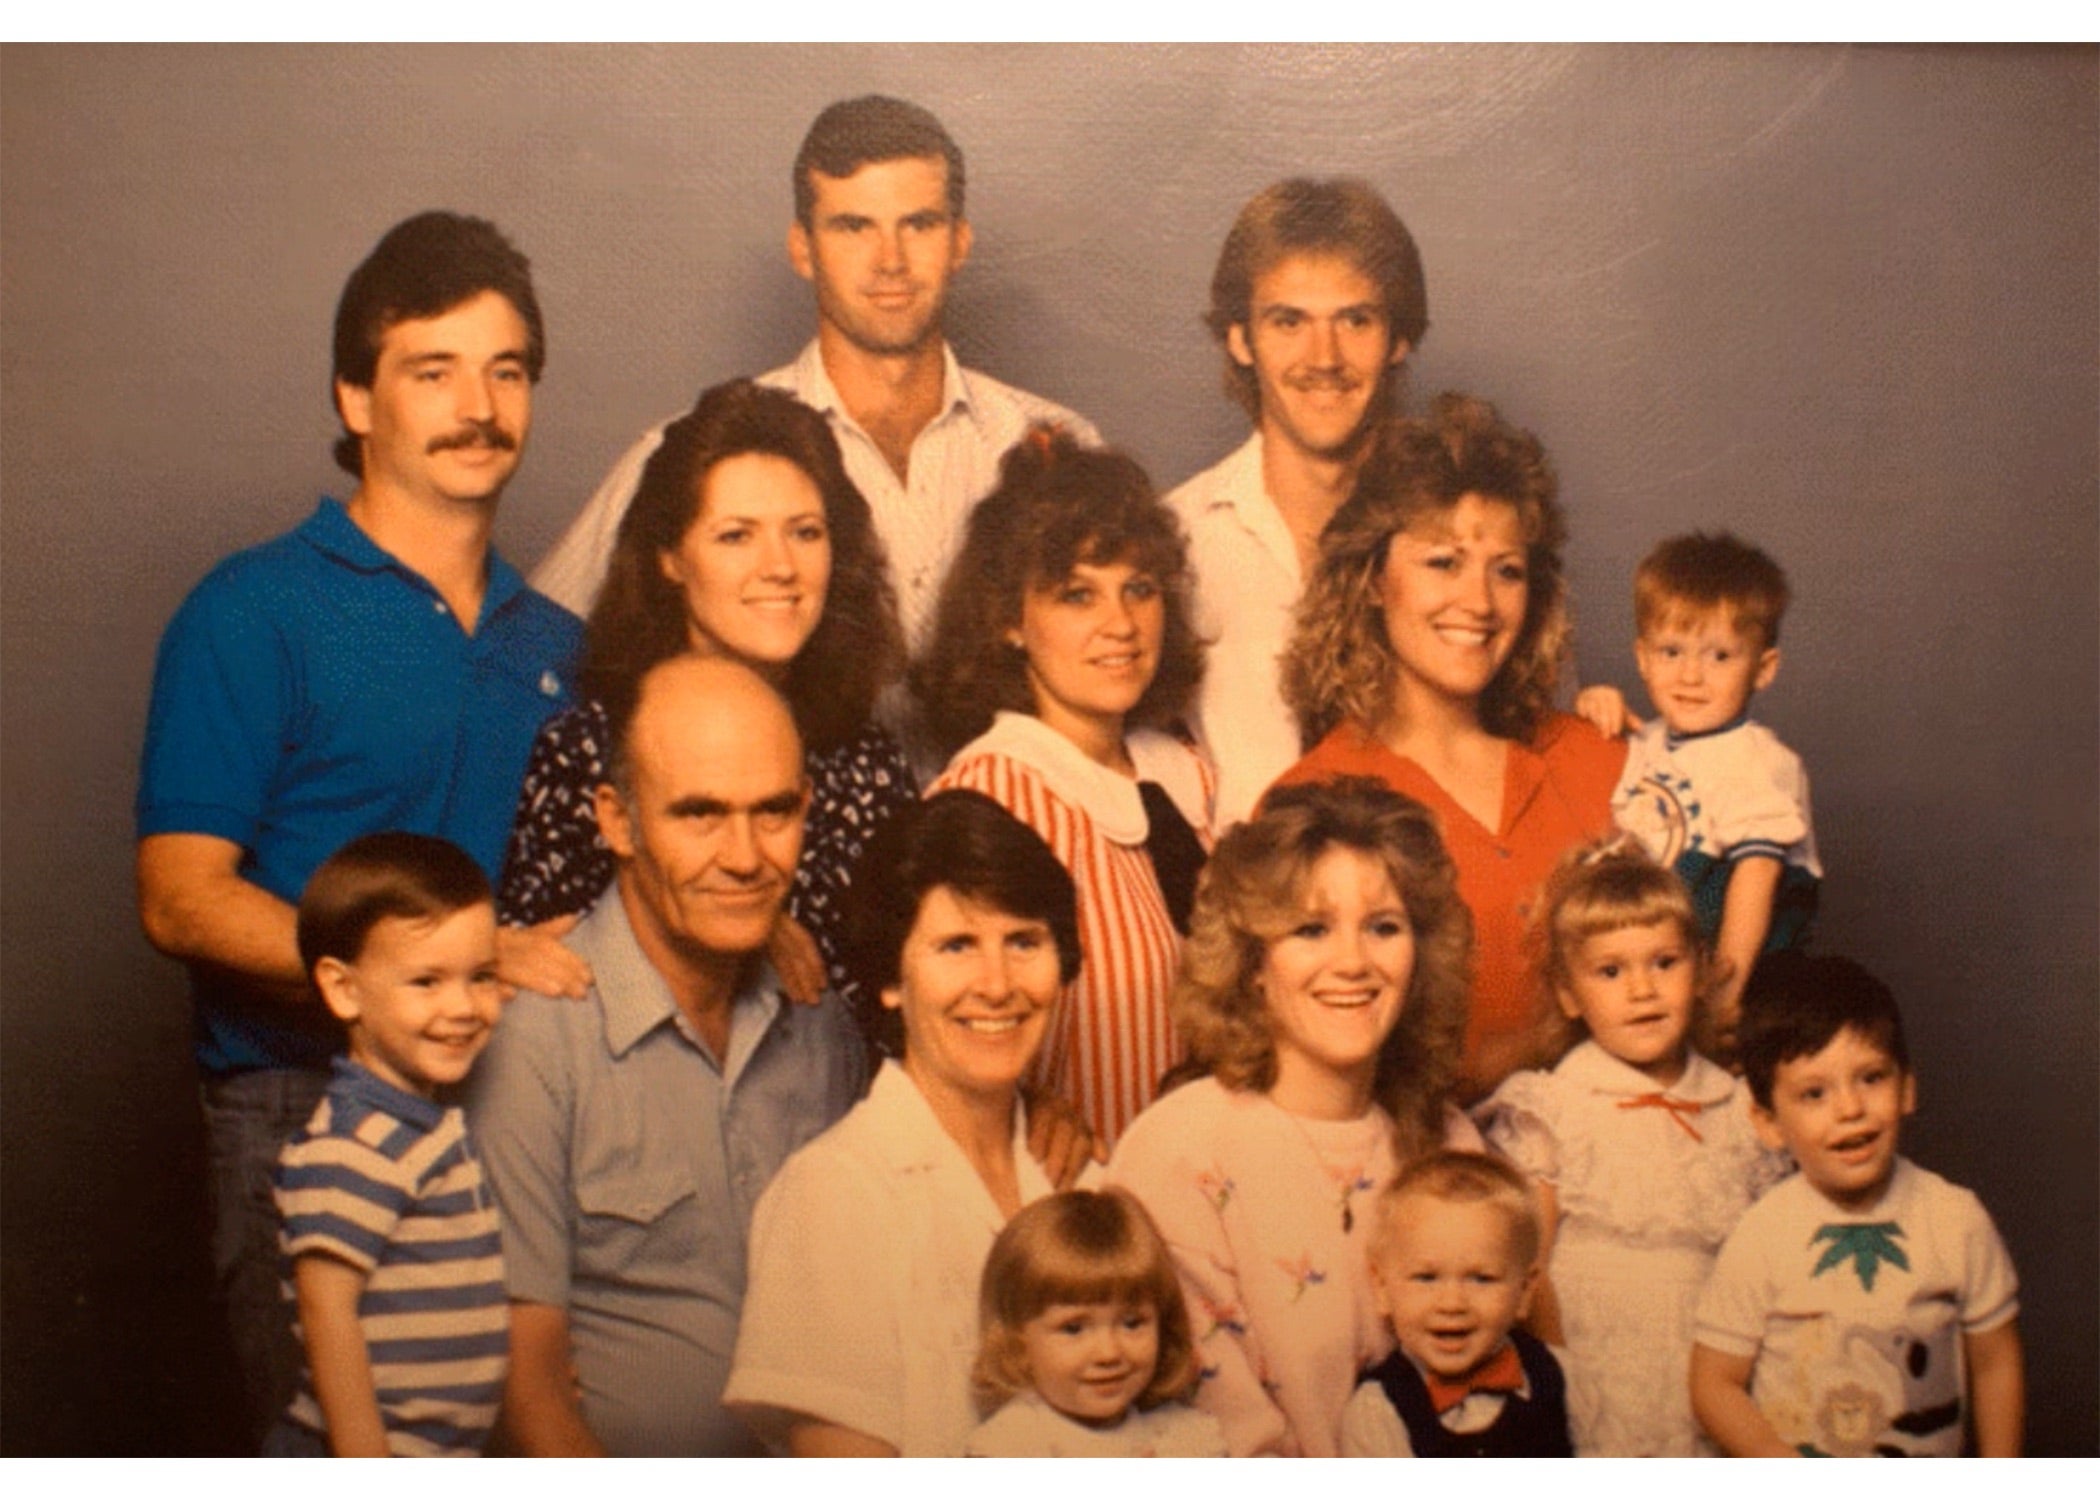 The Stayners in a family photo taken in the 1980s